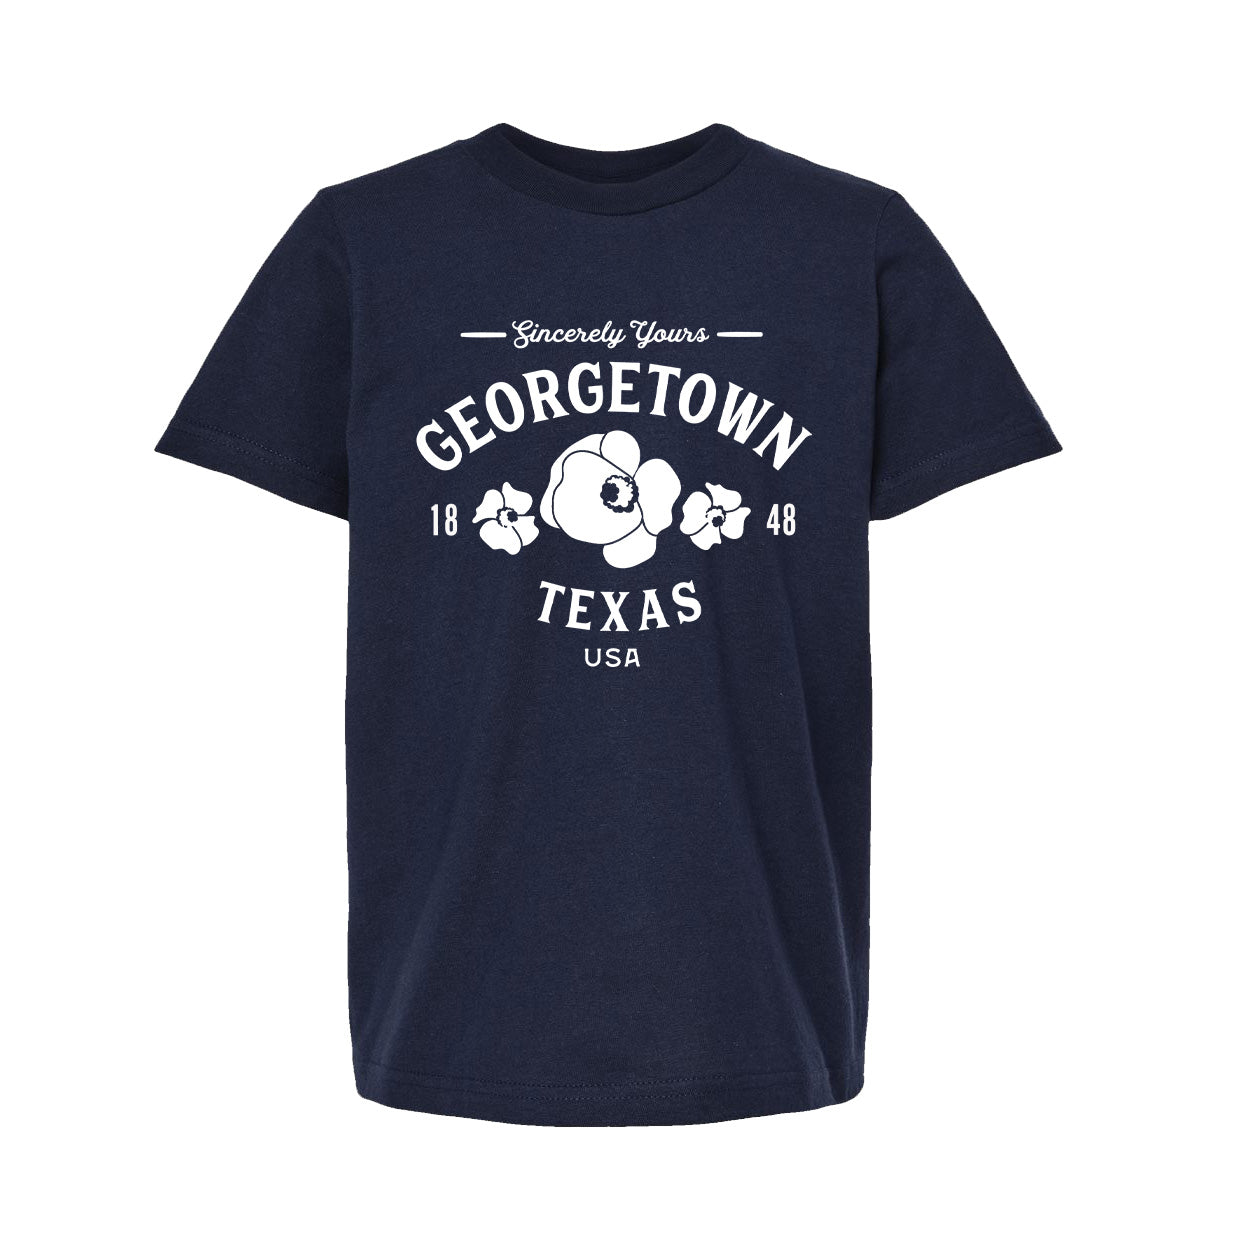 Georgetown Texas Youth T-shirt - Poppies